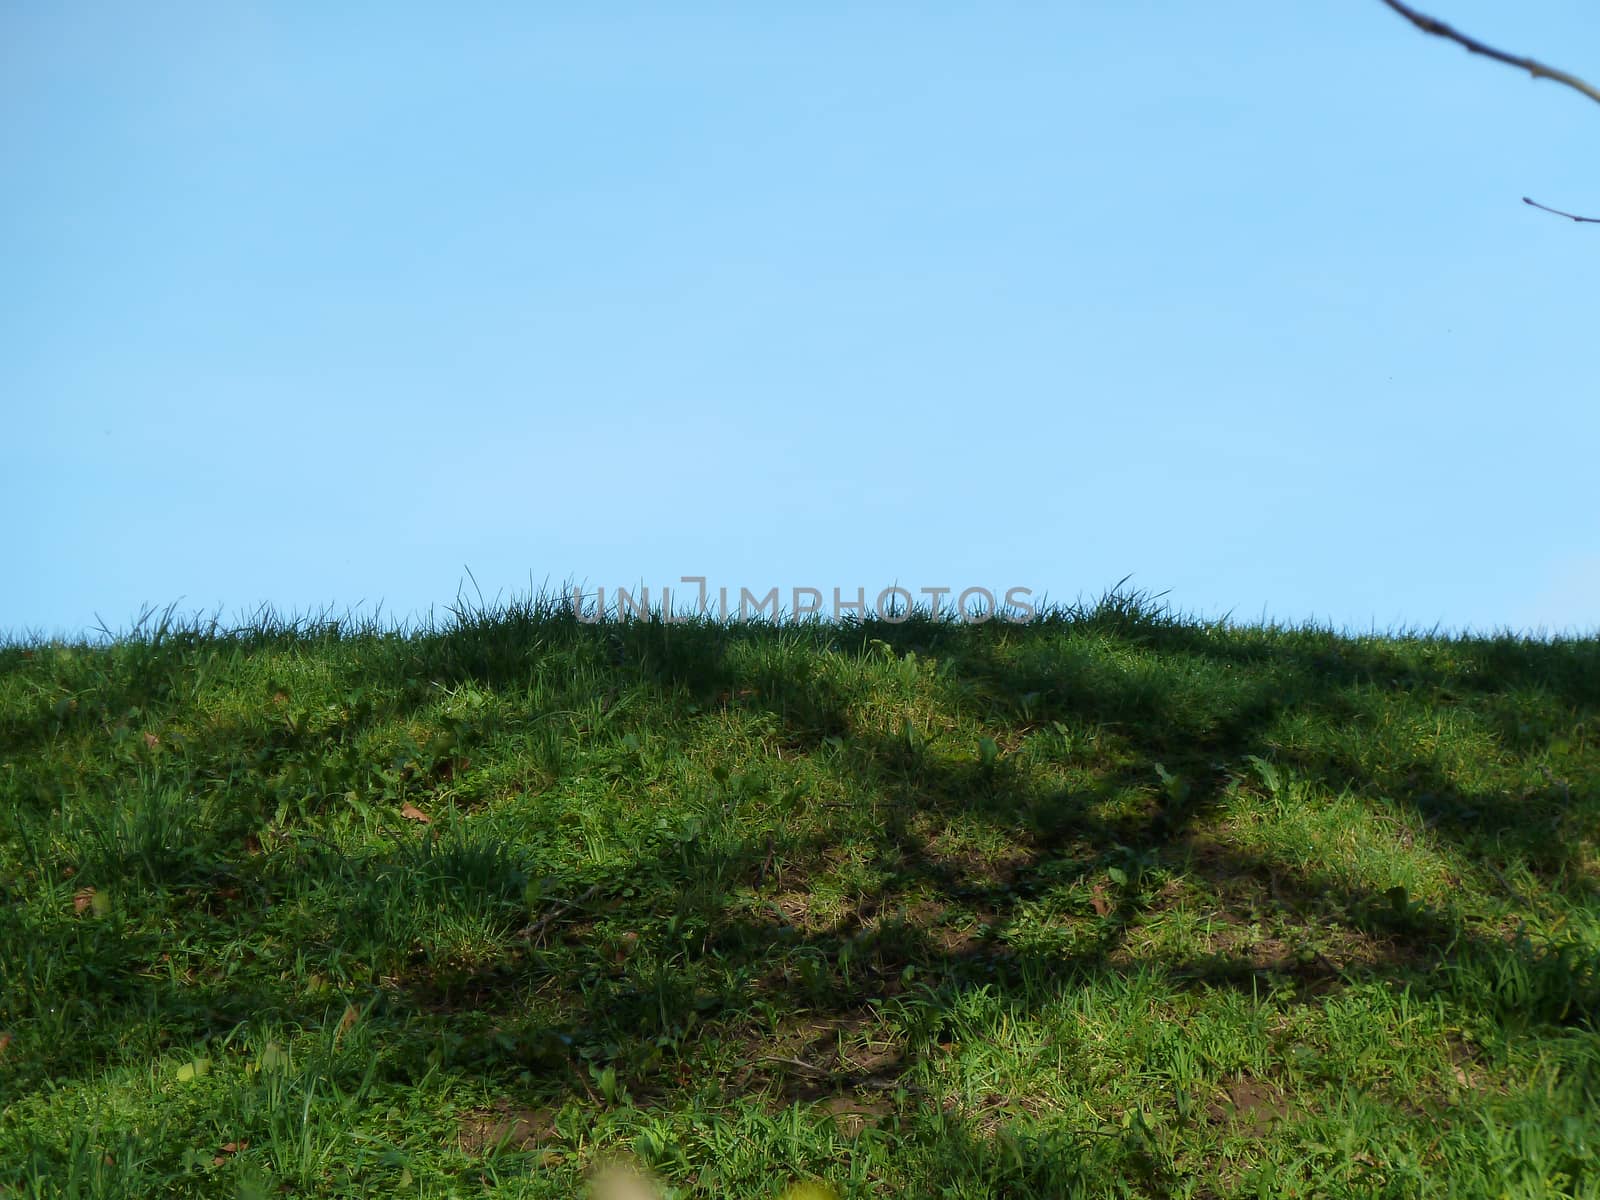 Green grassy slope with tree shadows and blue sky